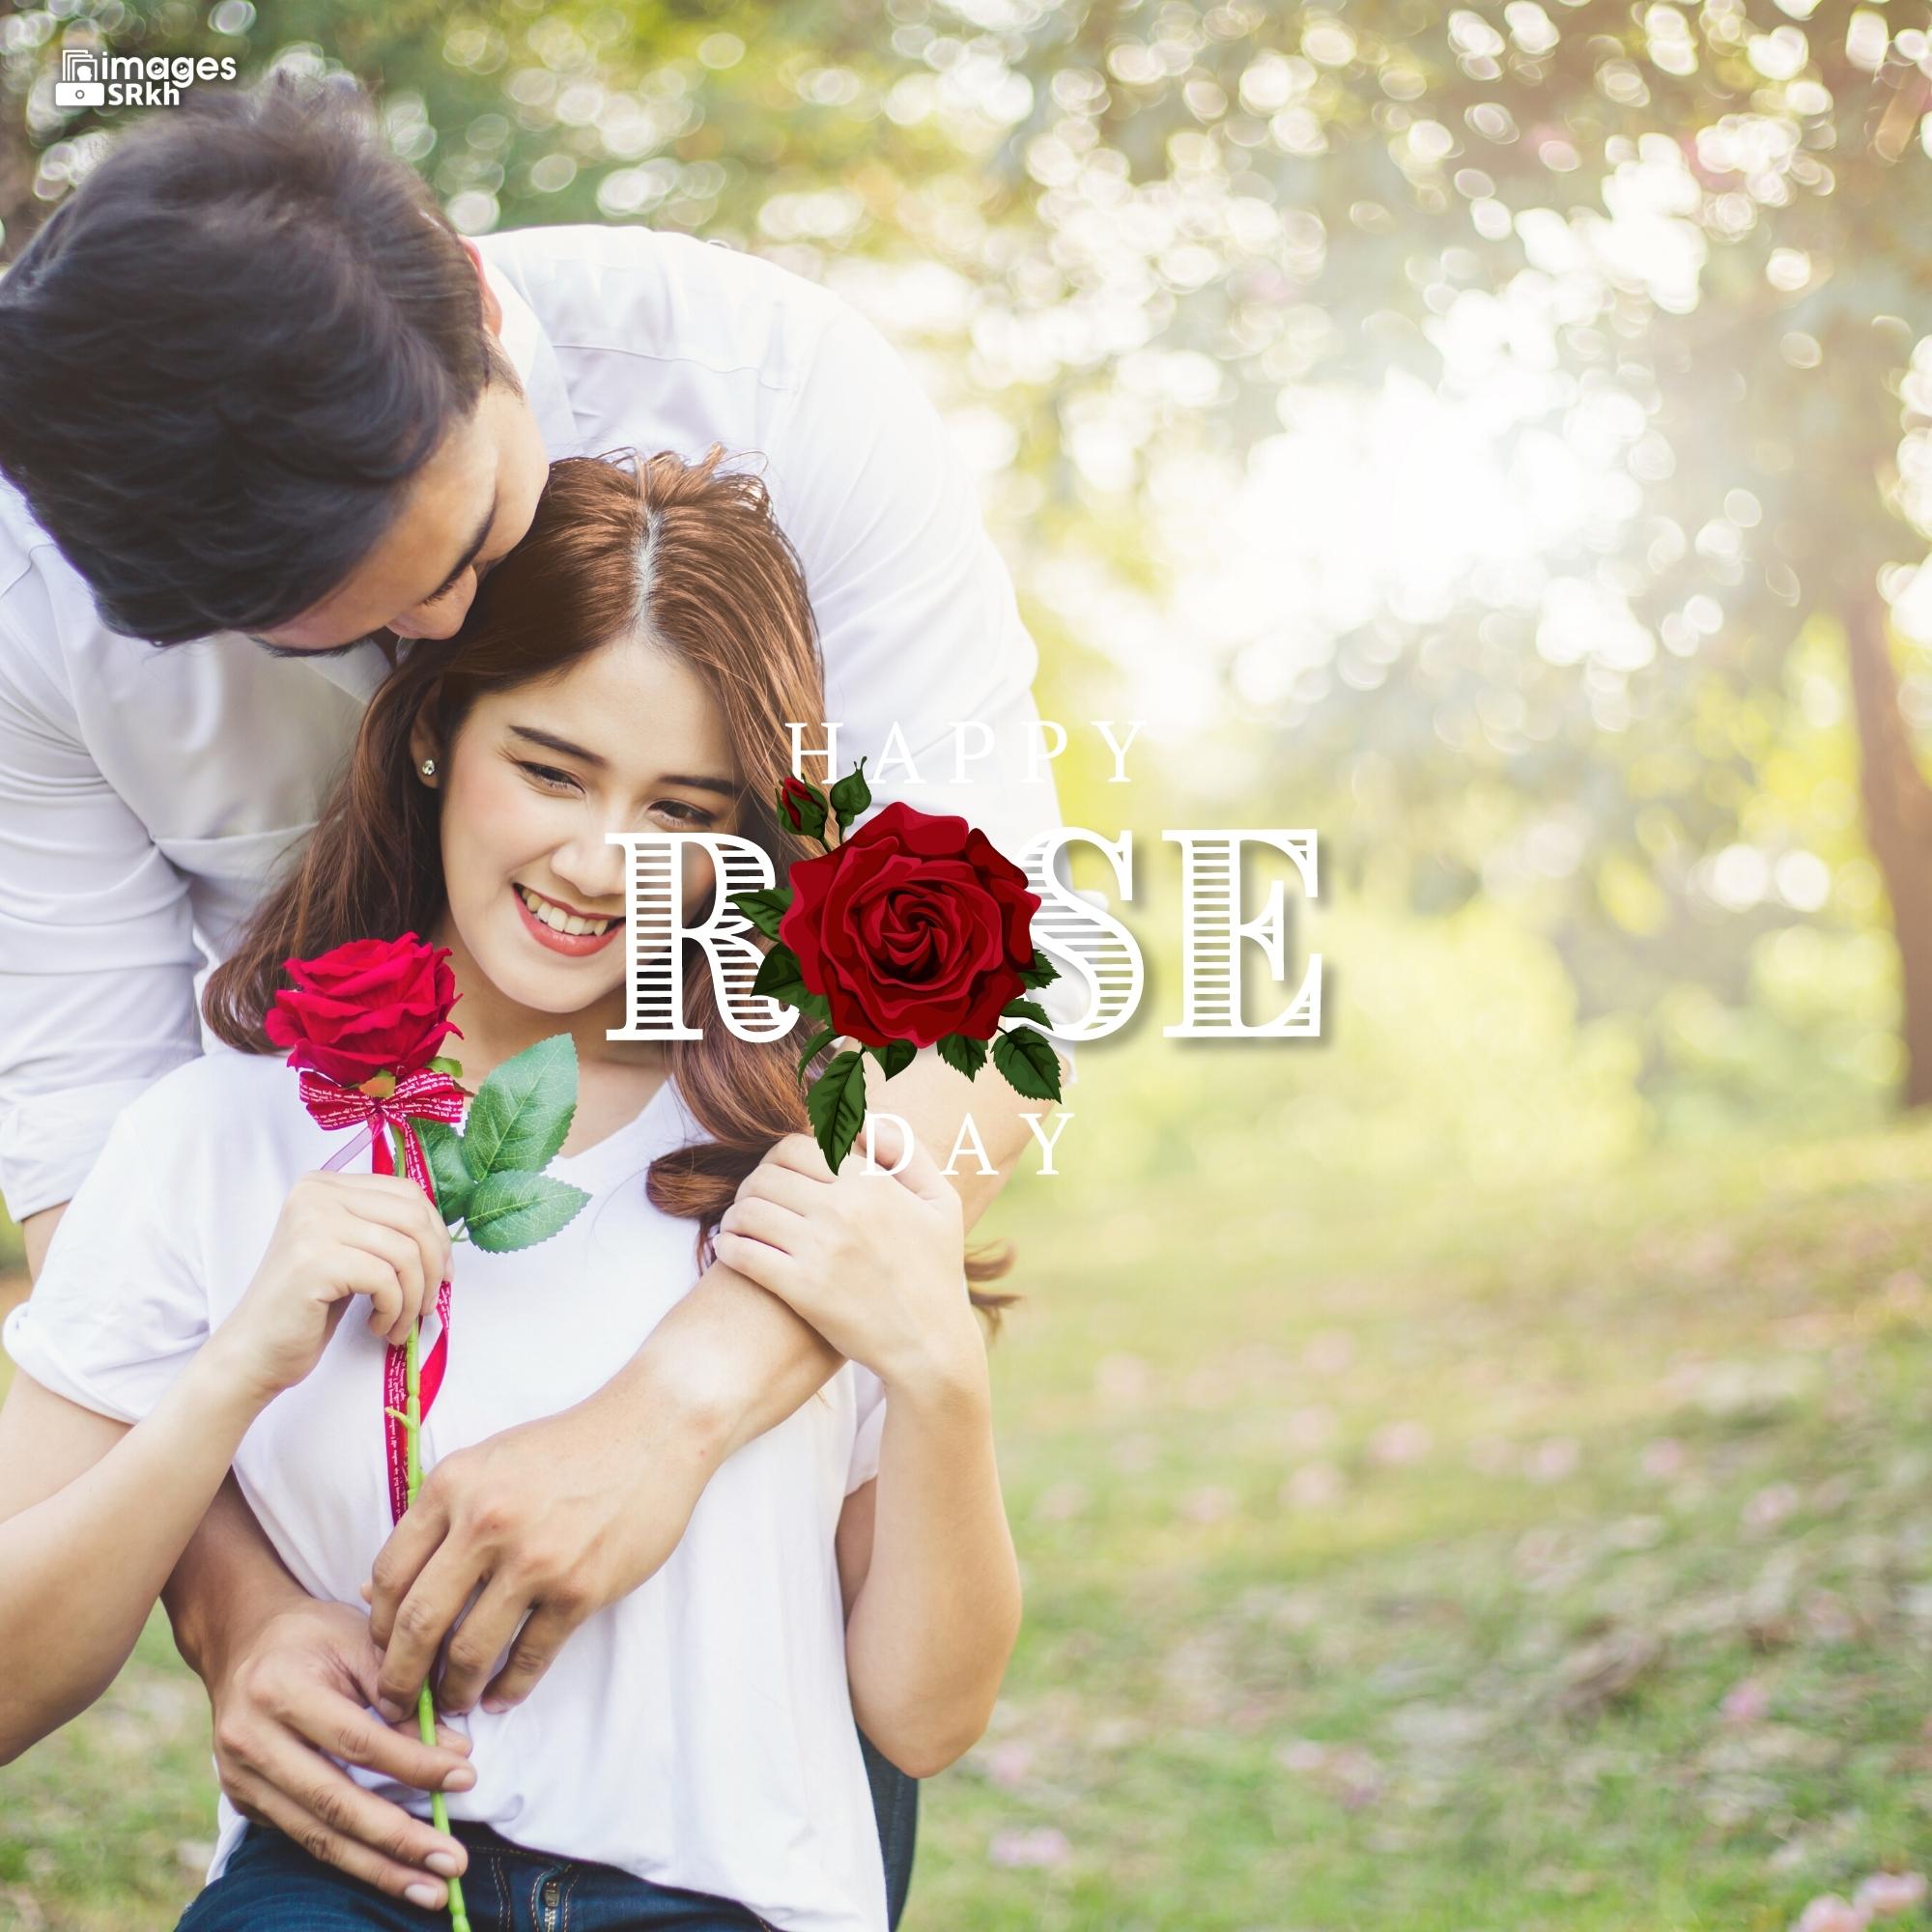 Romantic Rose Day Images Hd Download (30)